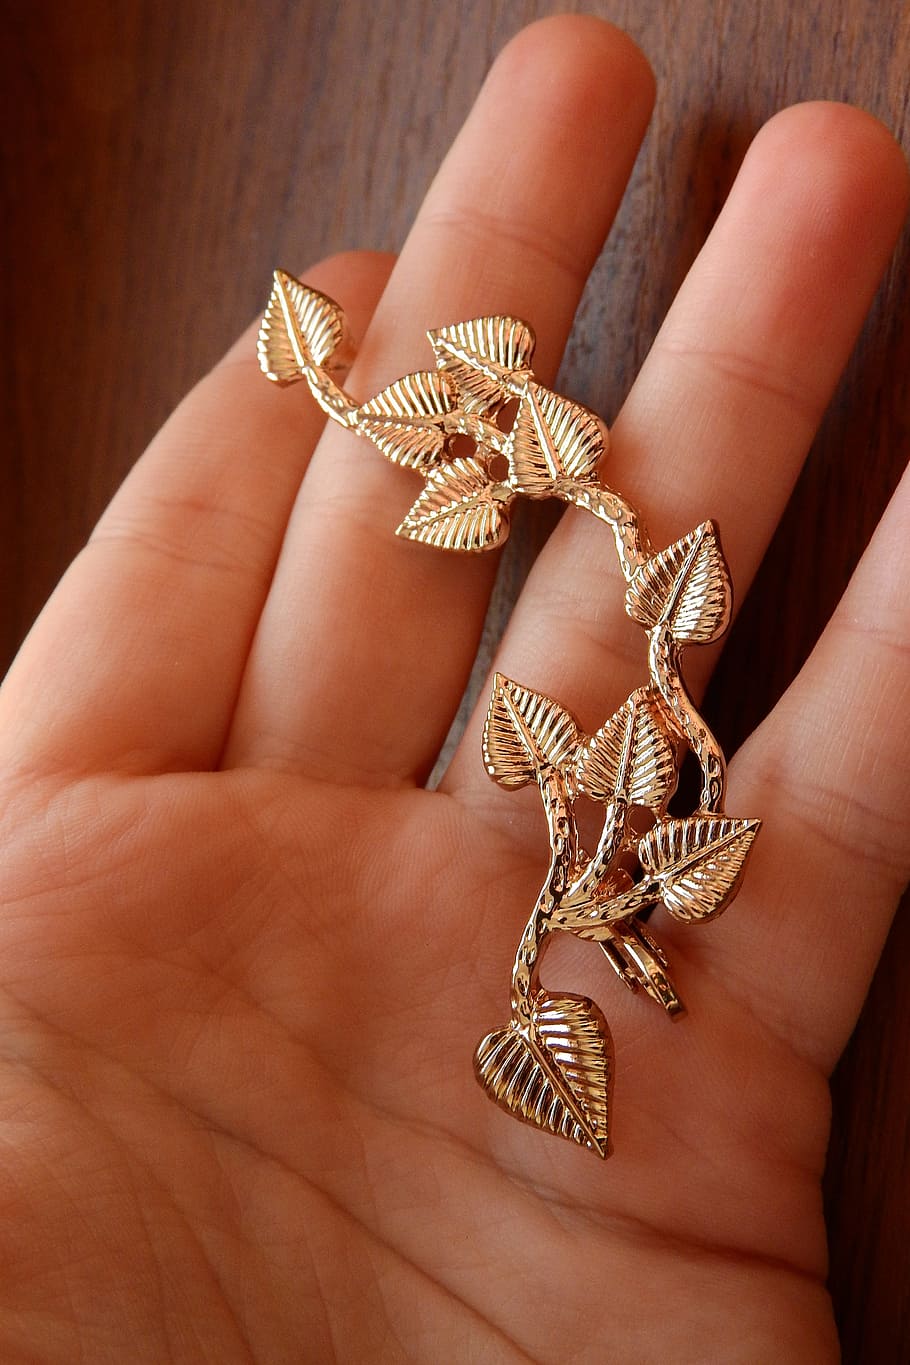 the golden jewel in my hand, a jewel in the palm of your hand, big earrings, gold twig with leaves, human body part, human hand, hand, body part, real people, one person